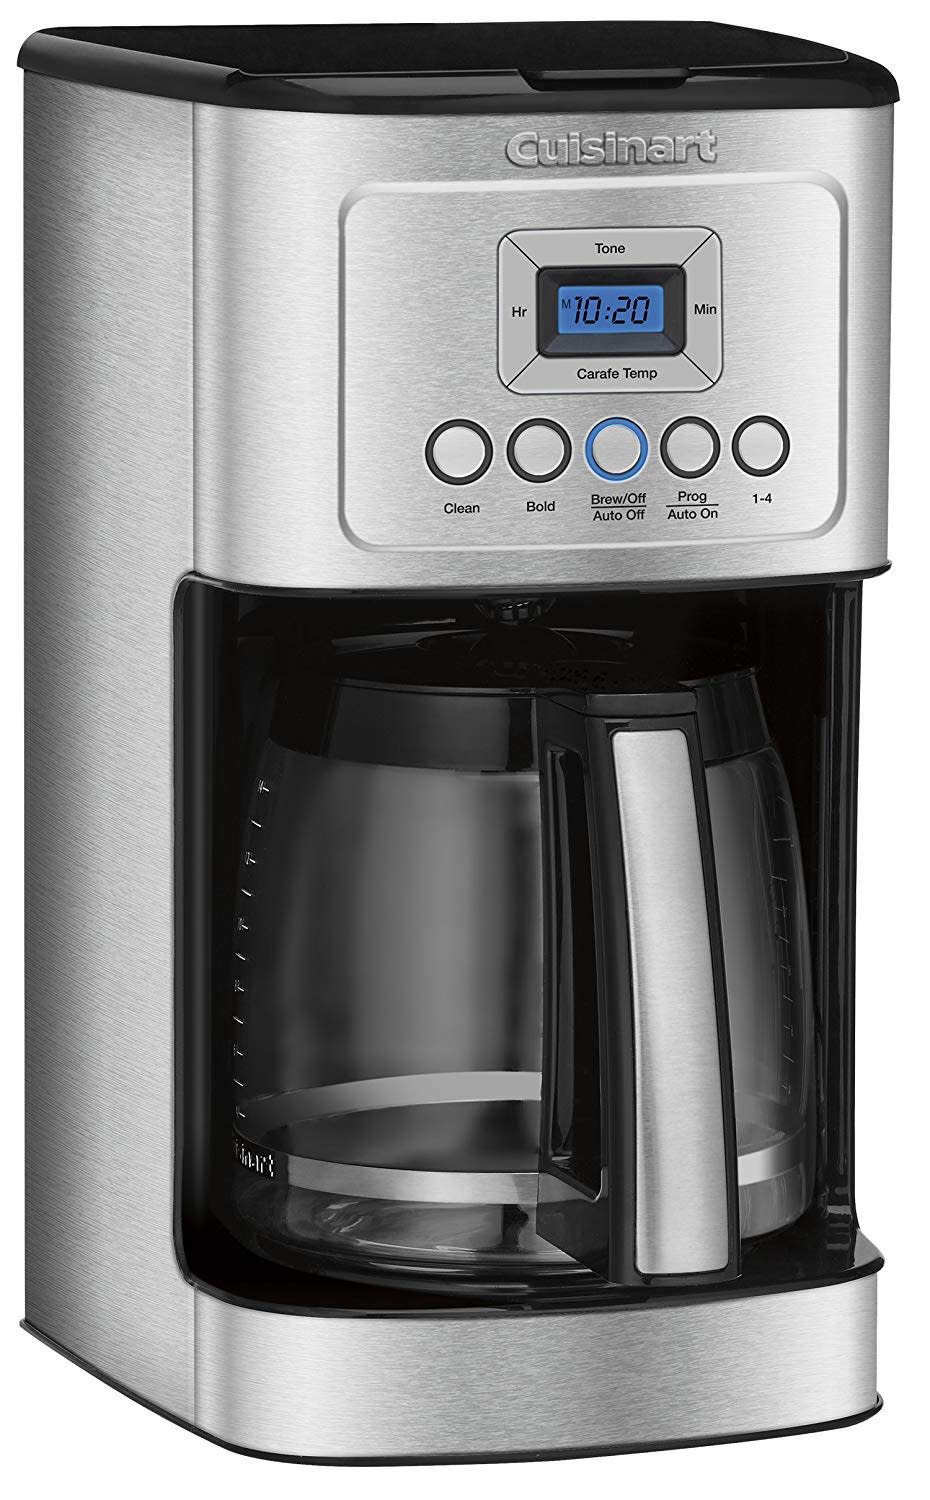 Hot coffee all morning long? Yep, it's possible with this Cuisinart coffee maker. (Photo: Amazon)